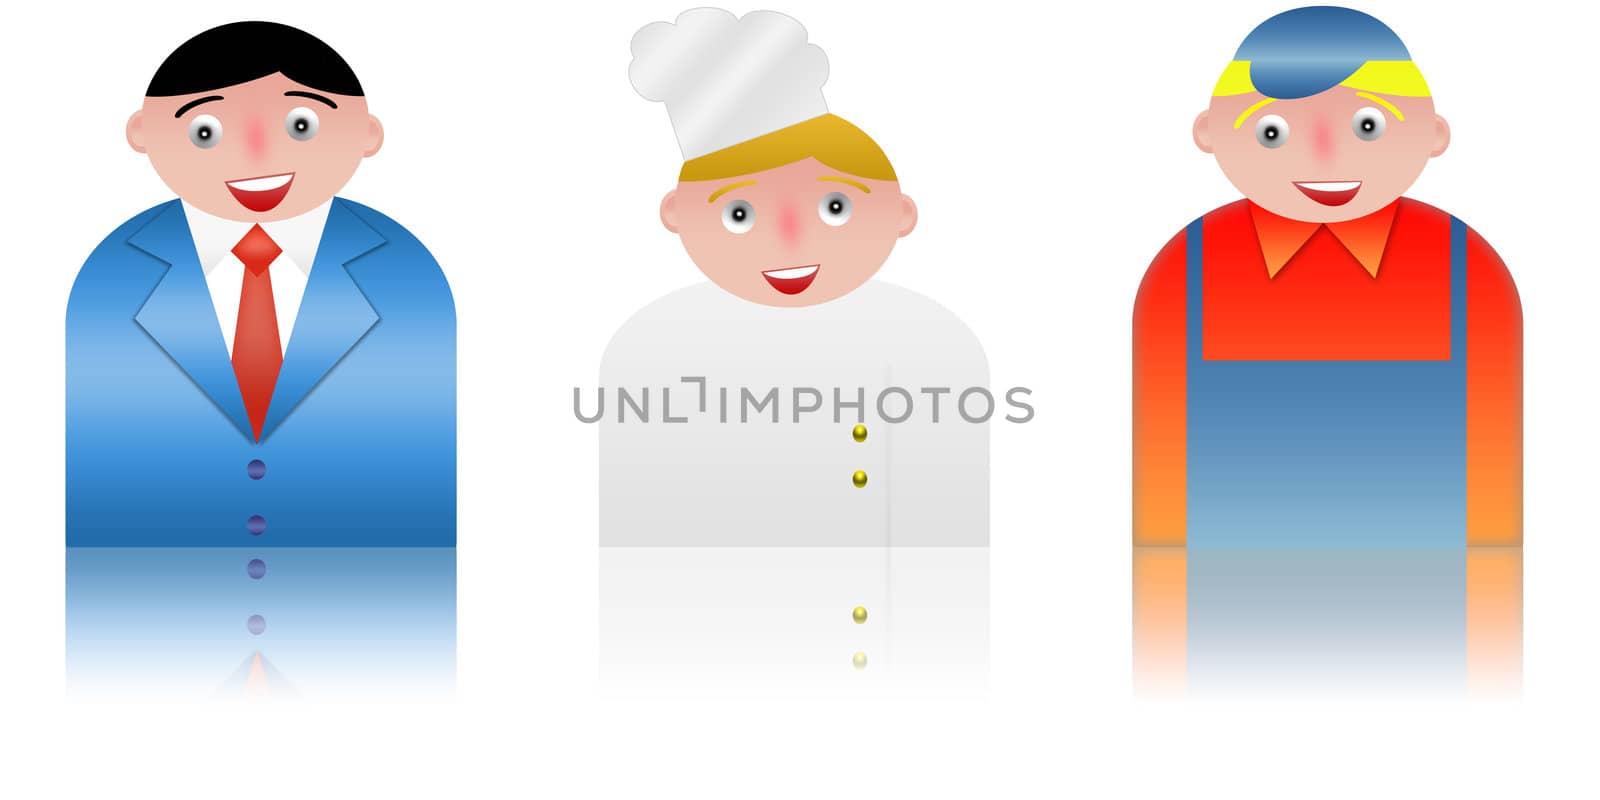 people icons of different professions. white background and reflection
